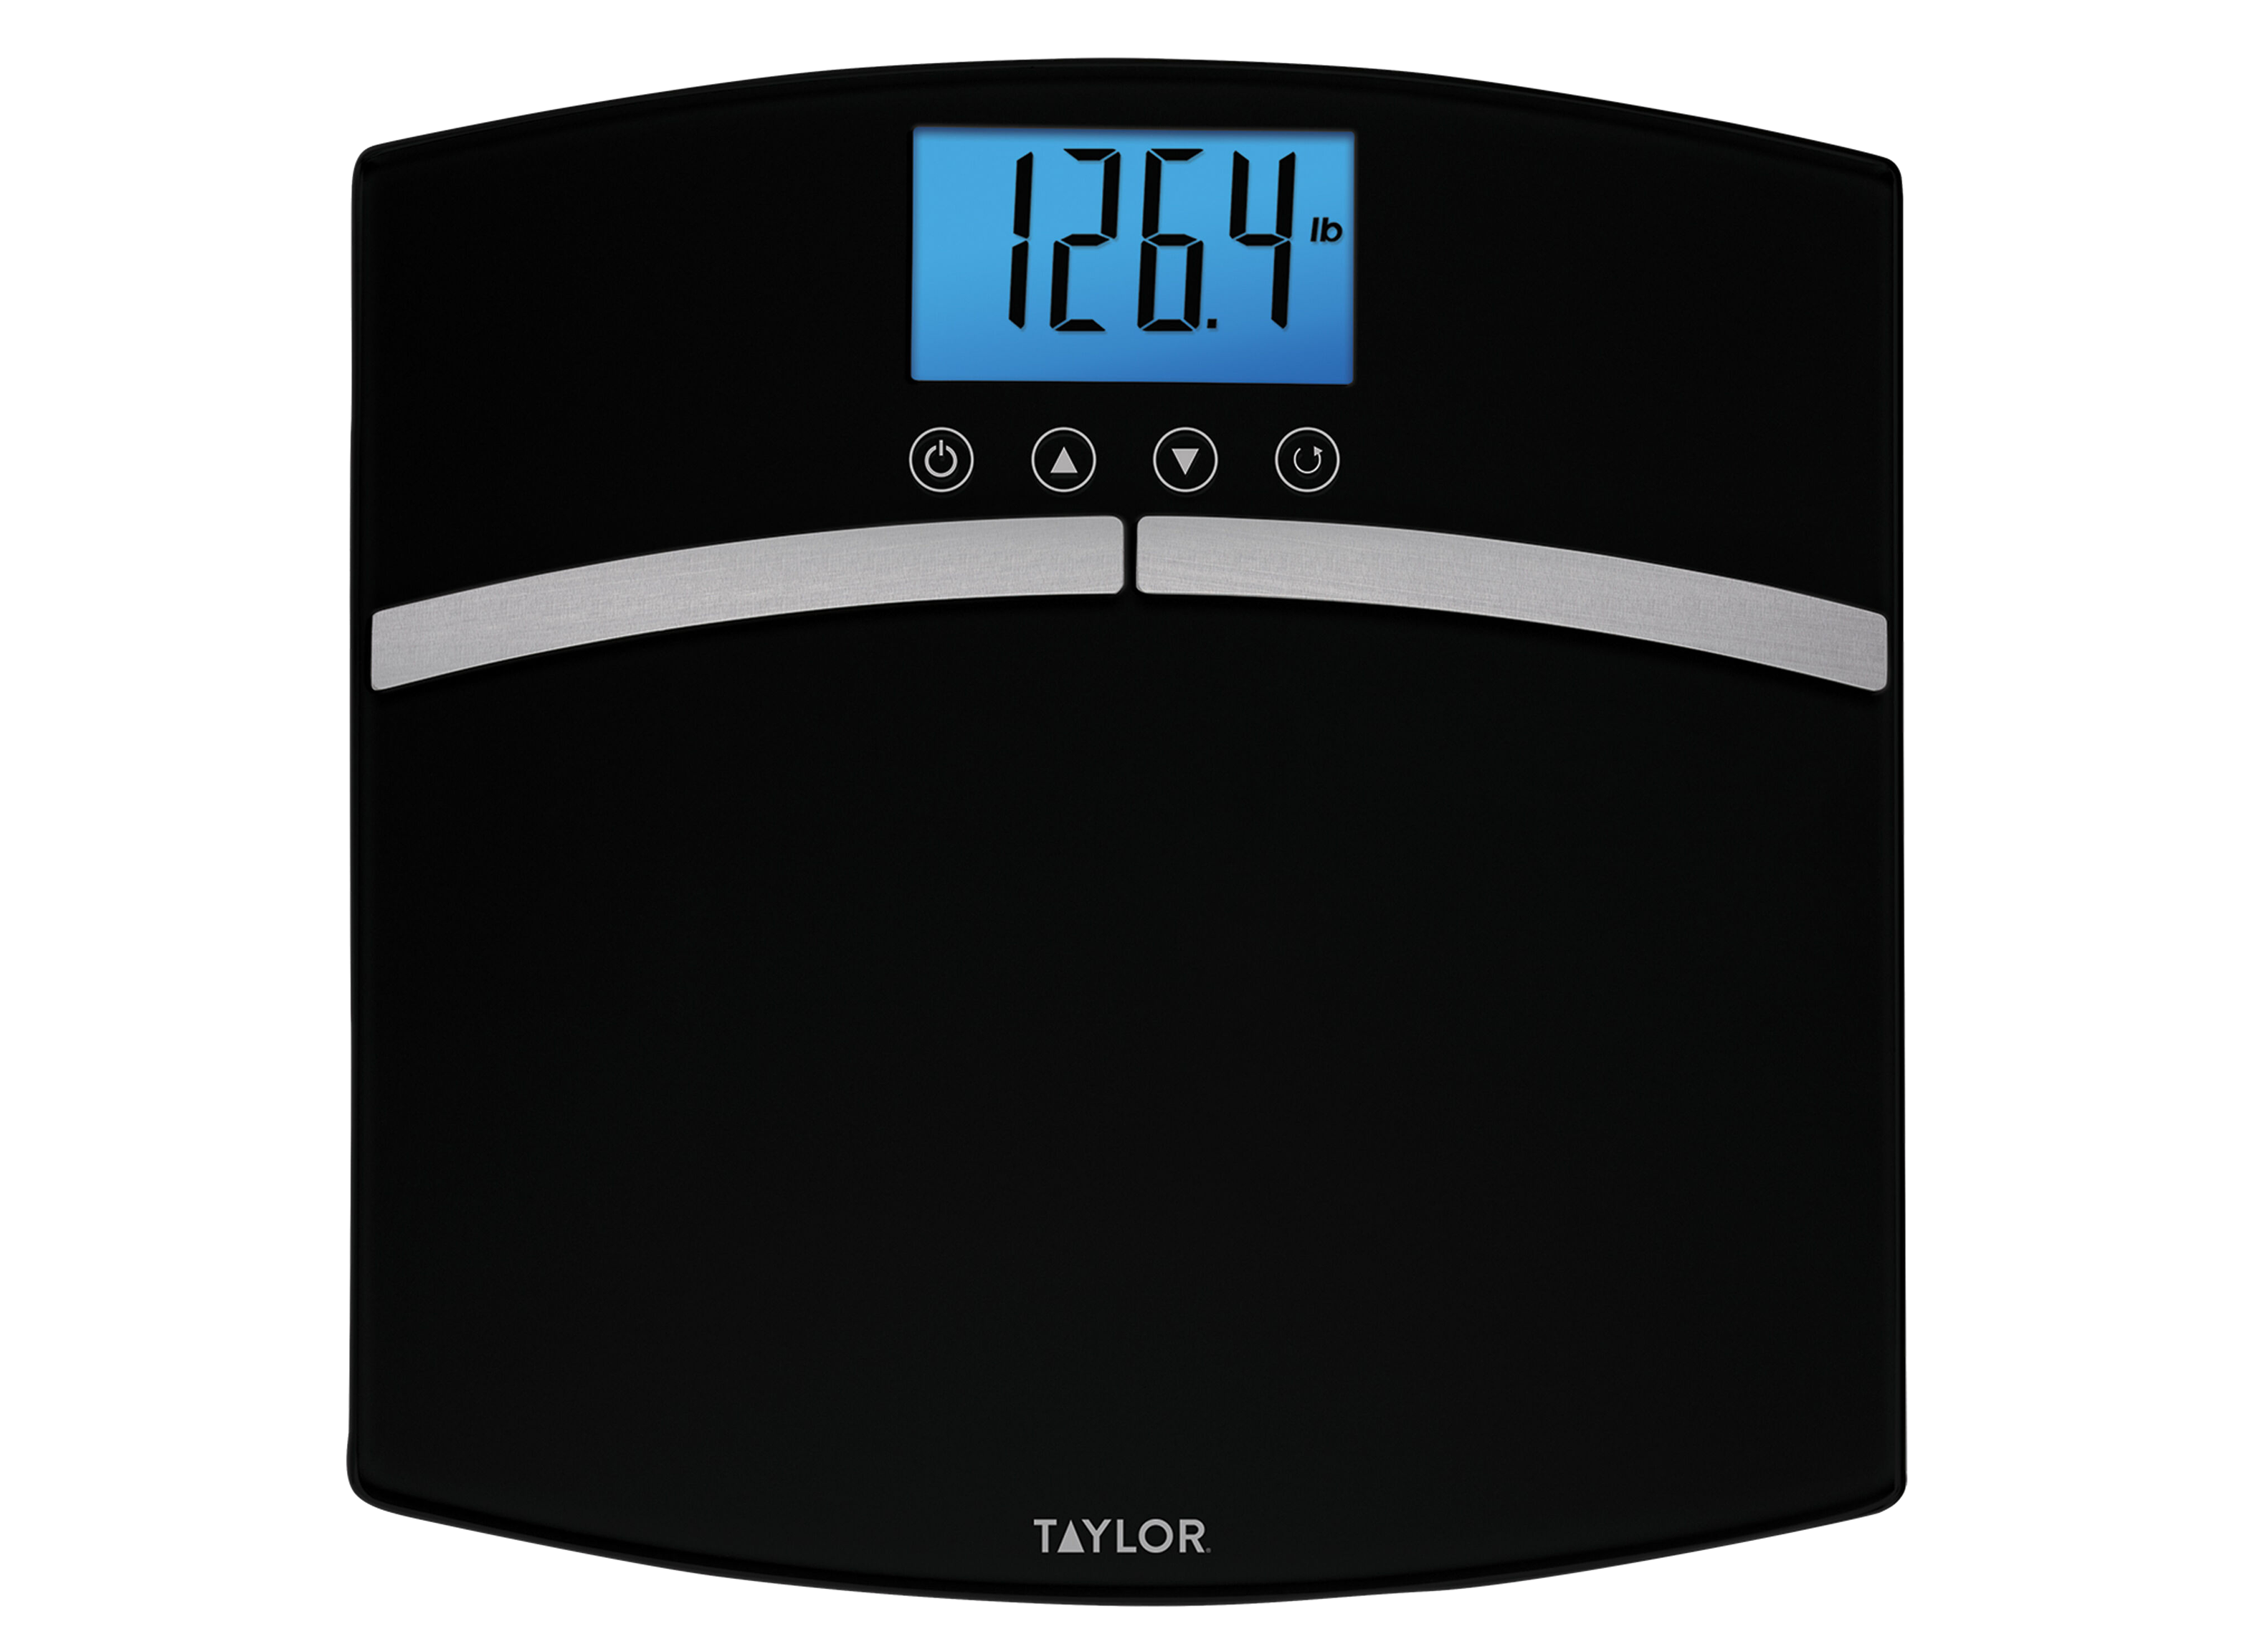 https://crdms.images.consumerreports.org/prod/products/cr/models/407543-digital-scales-taylor-glass-body-composition-5789fw-10031542.png